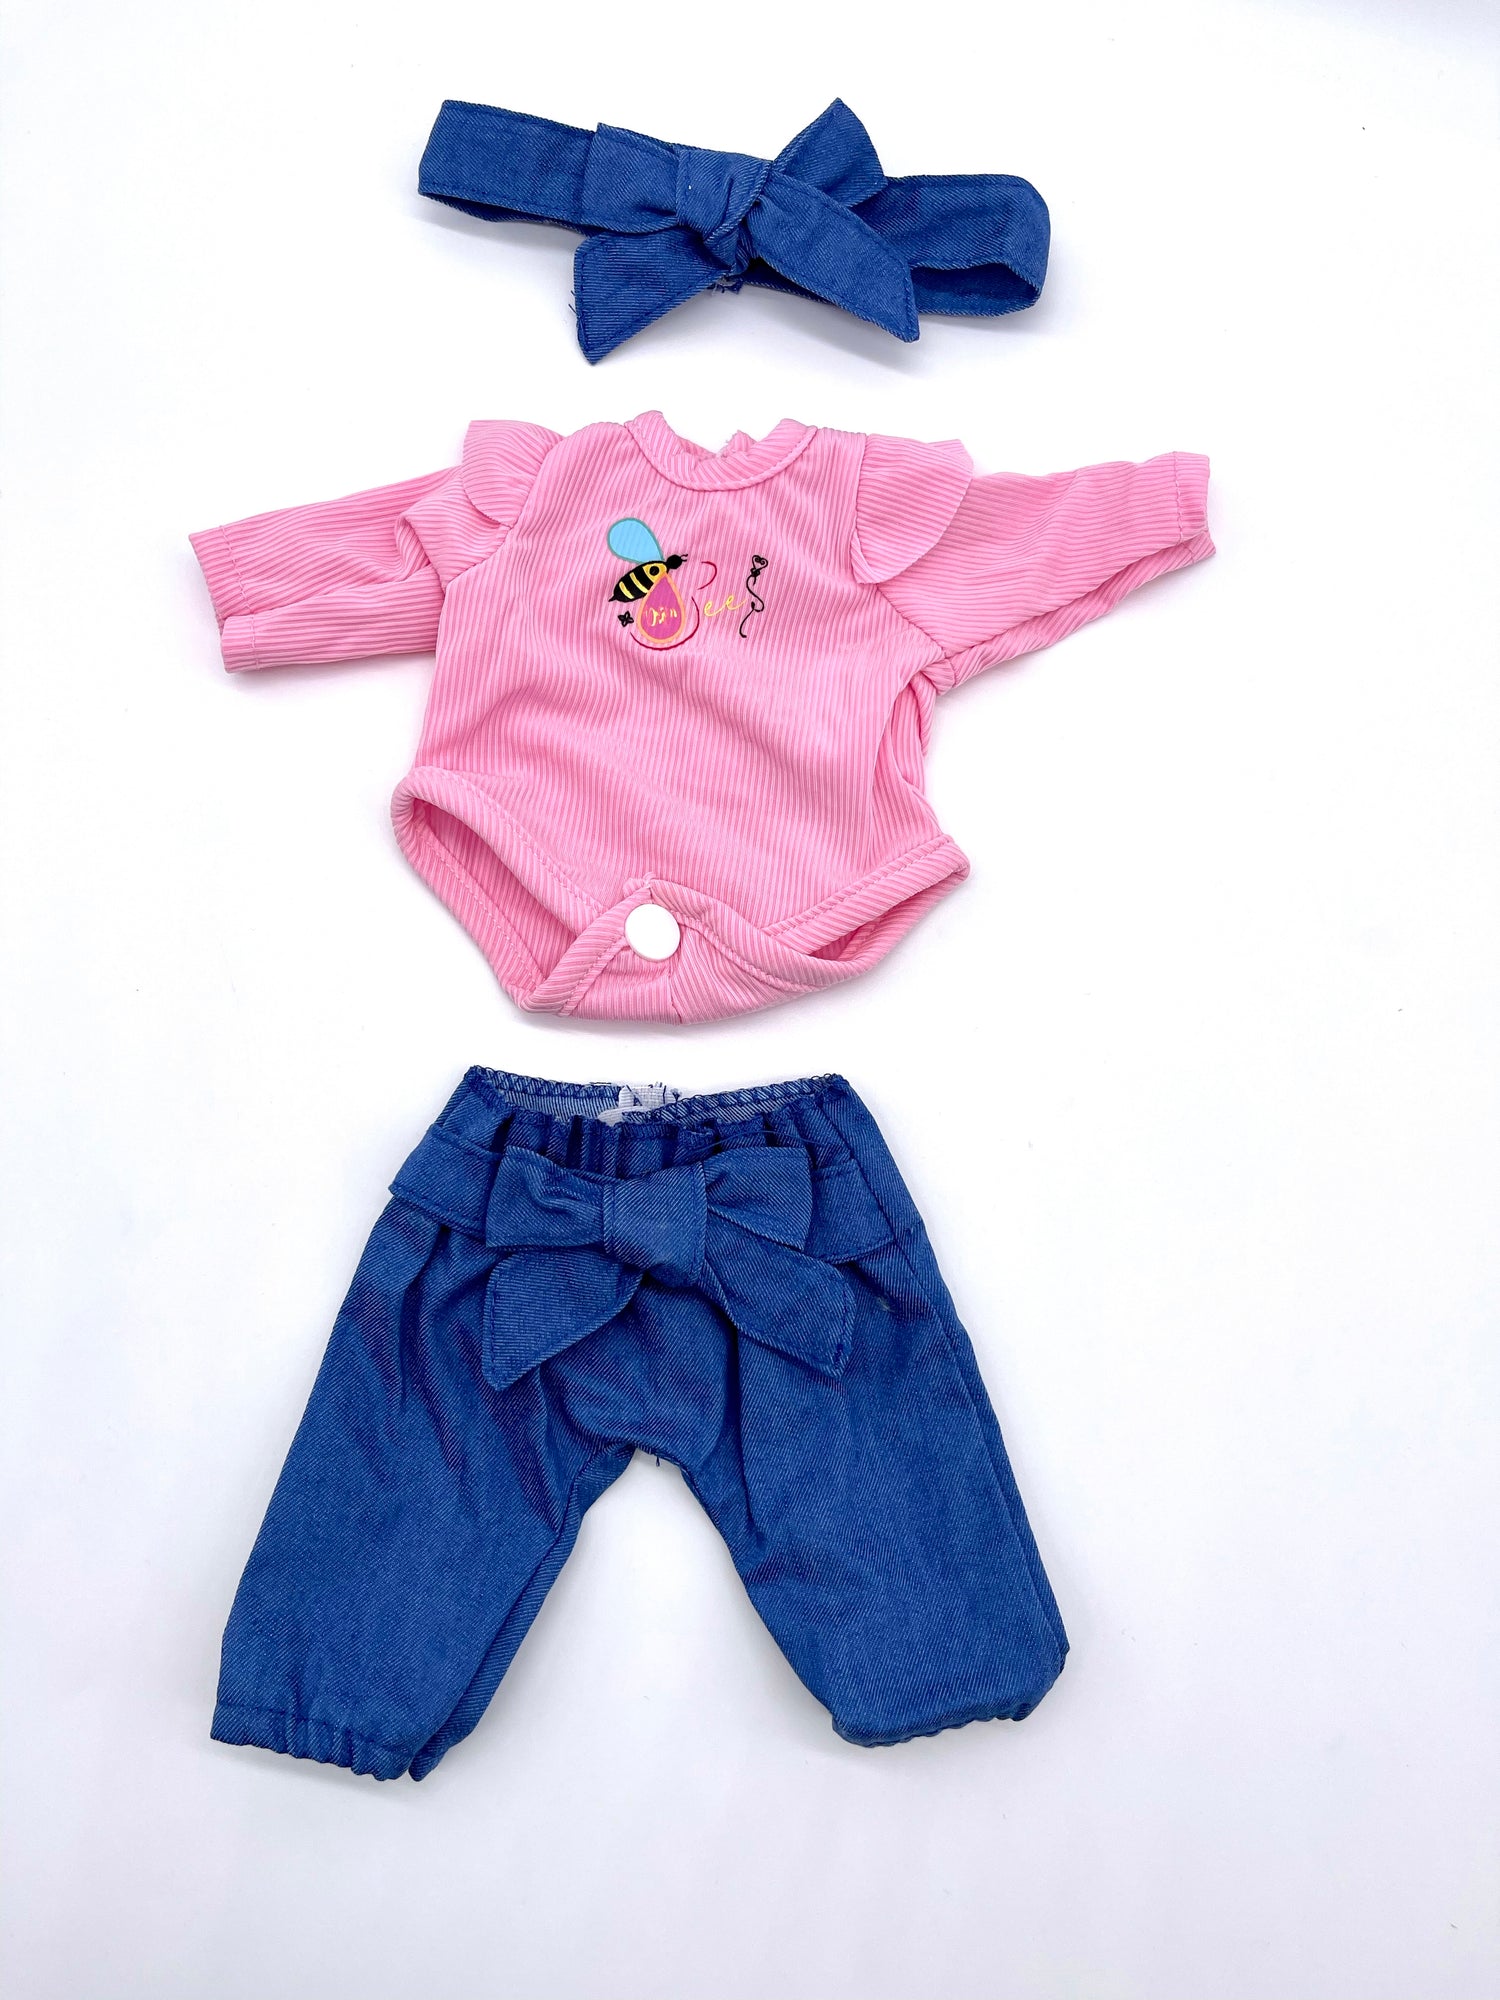 Denim Outfit - 4 Piece Set for Baby Bee (doll sold separately) | Orijin Bees